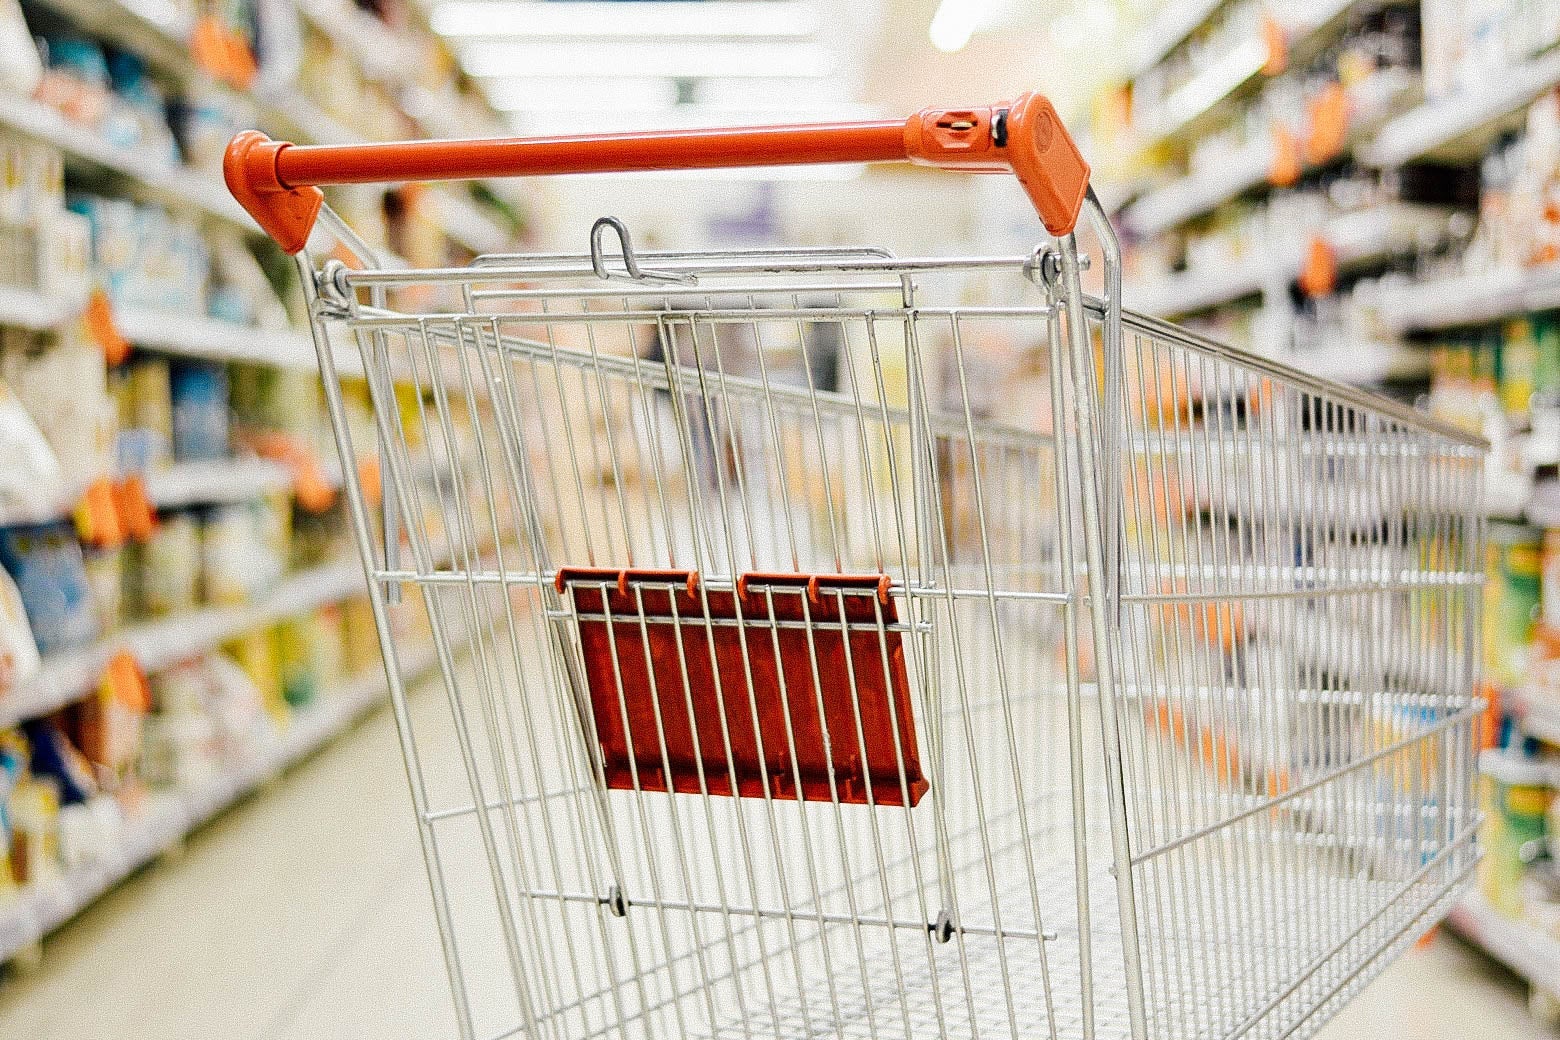 An empty shopping cart is seen in a supermarket aisle.